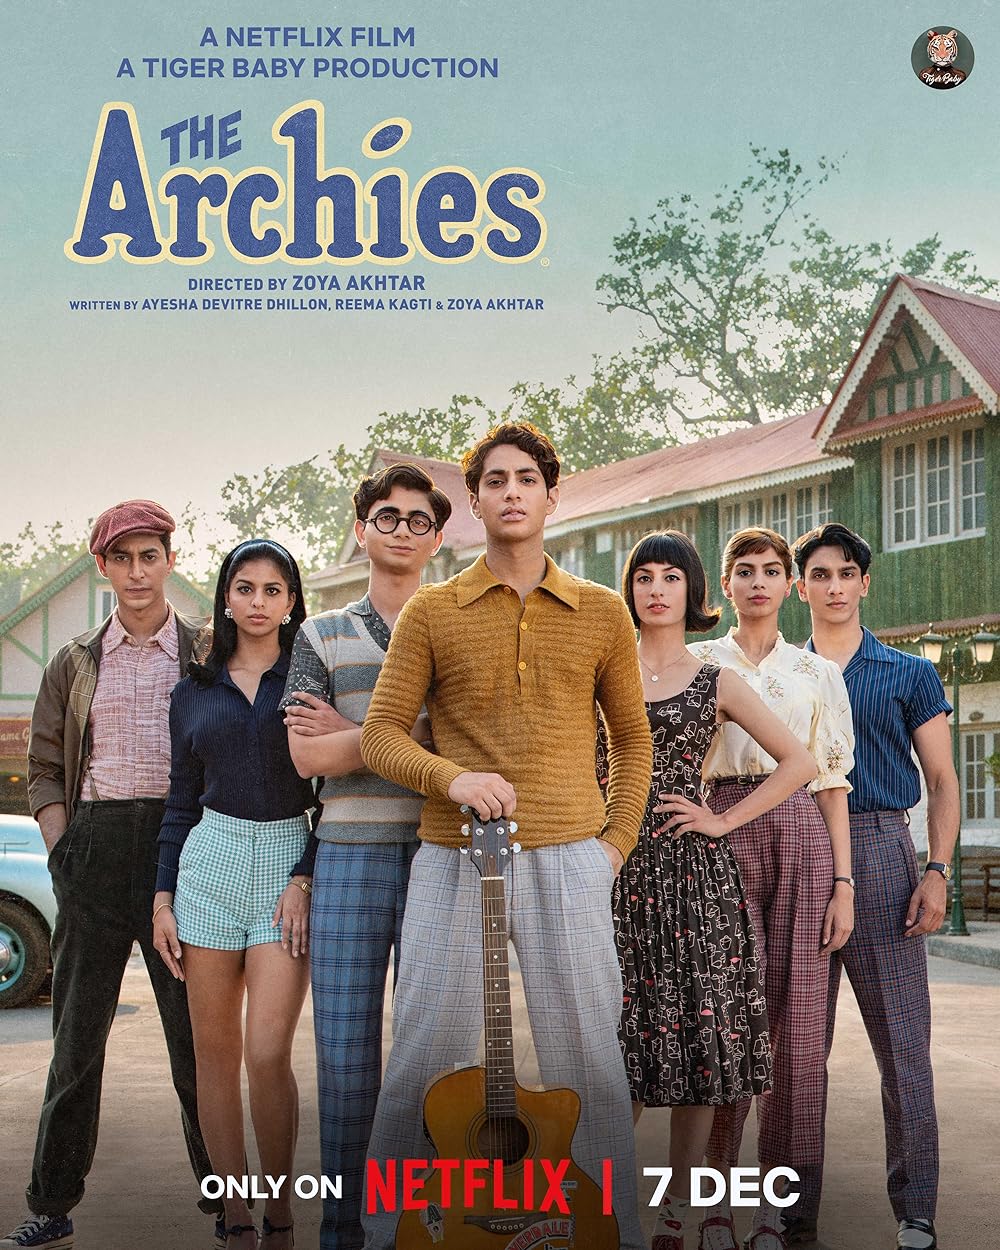 The Archies (December 7) -  NetflixTravel back in time to 1960s India with 